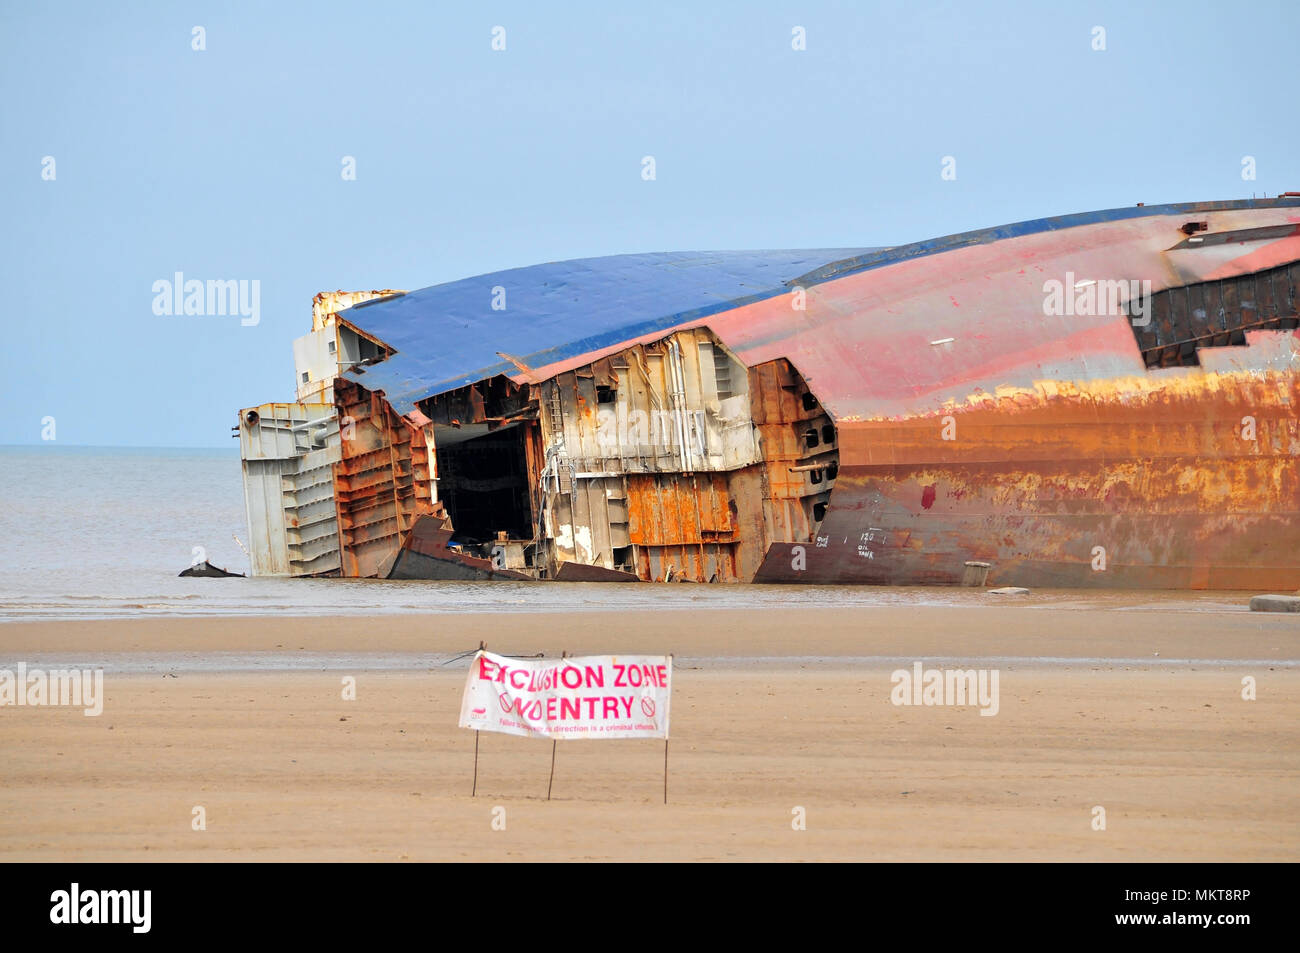 Grey sky receding tide view Riverdance Ferry wreck on its side, bow plates removed, with sand beach Exclusion Zone sign, Anchorsholme, Cleveleys, UK Stock Photo